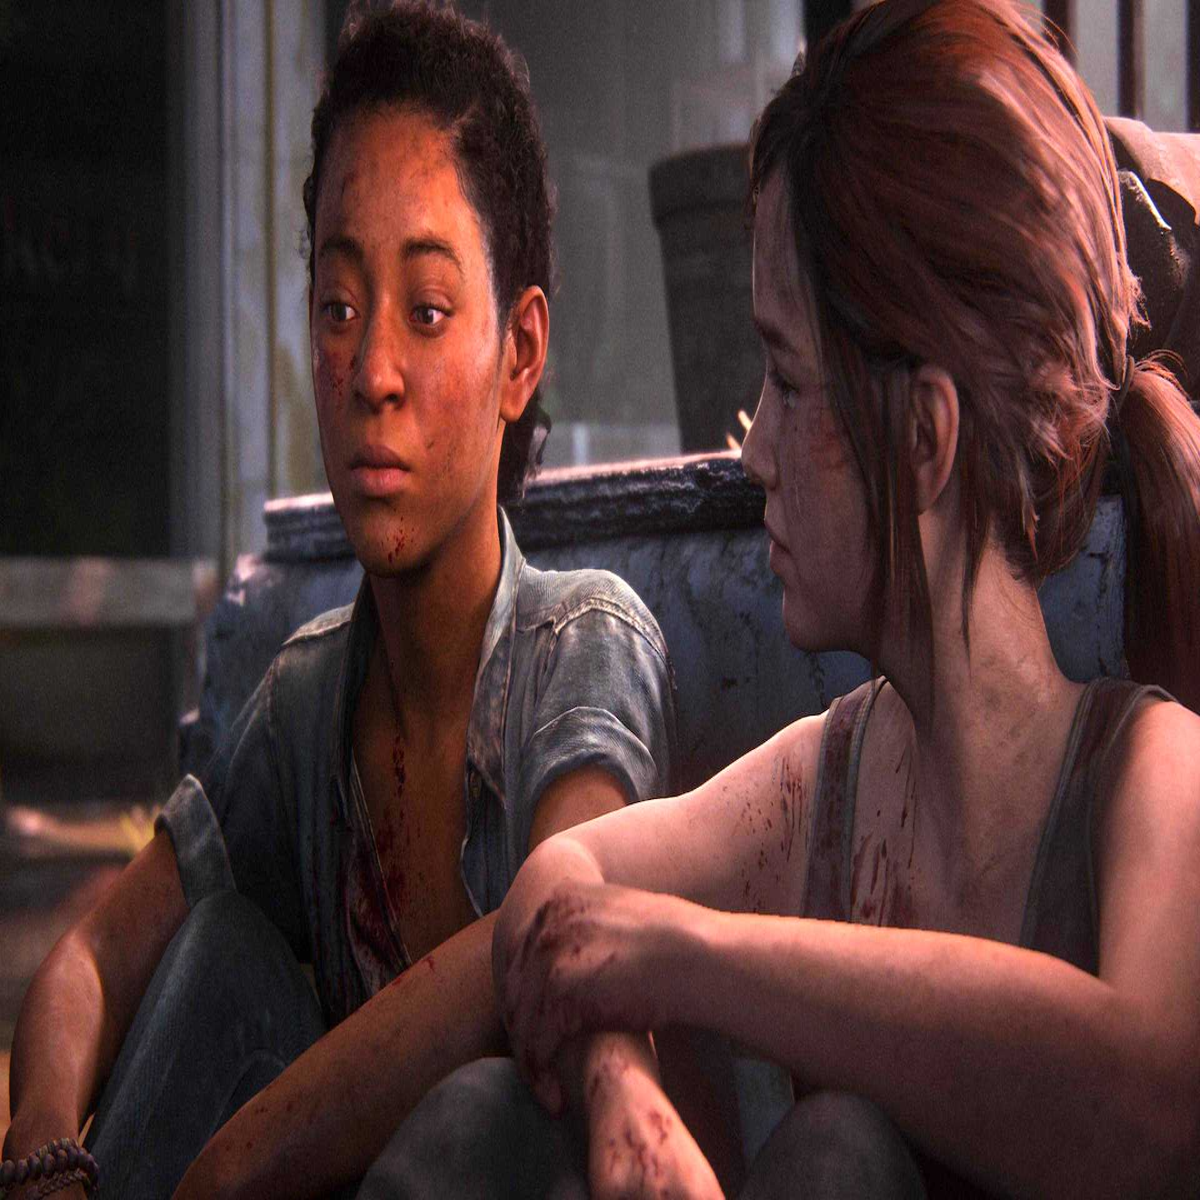 The Last of Us Left Behind Walkthrough, Guide, and Gameplay - News